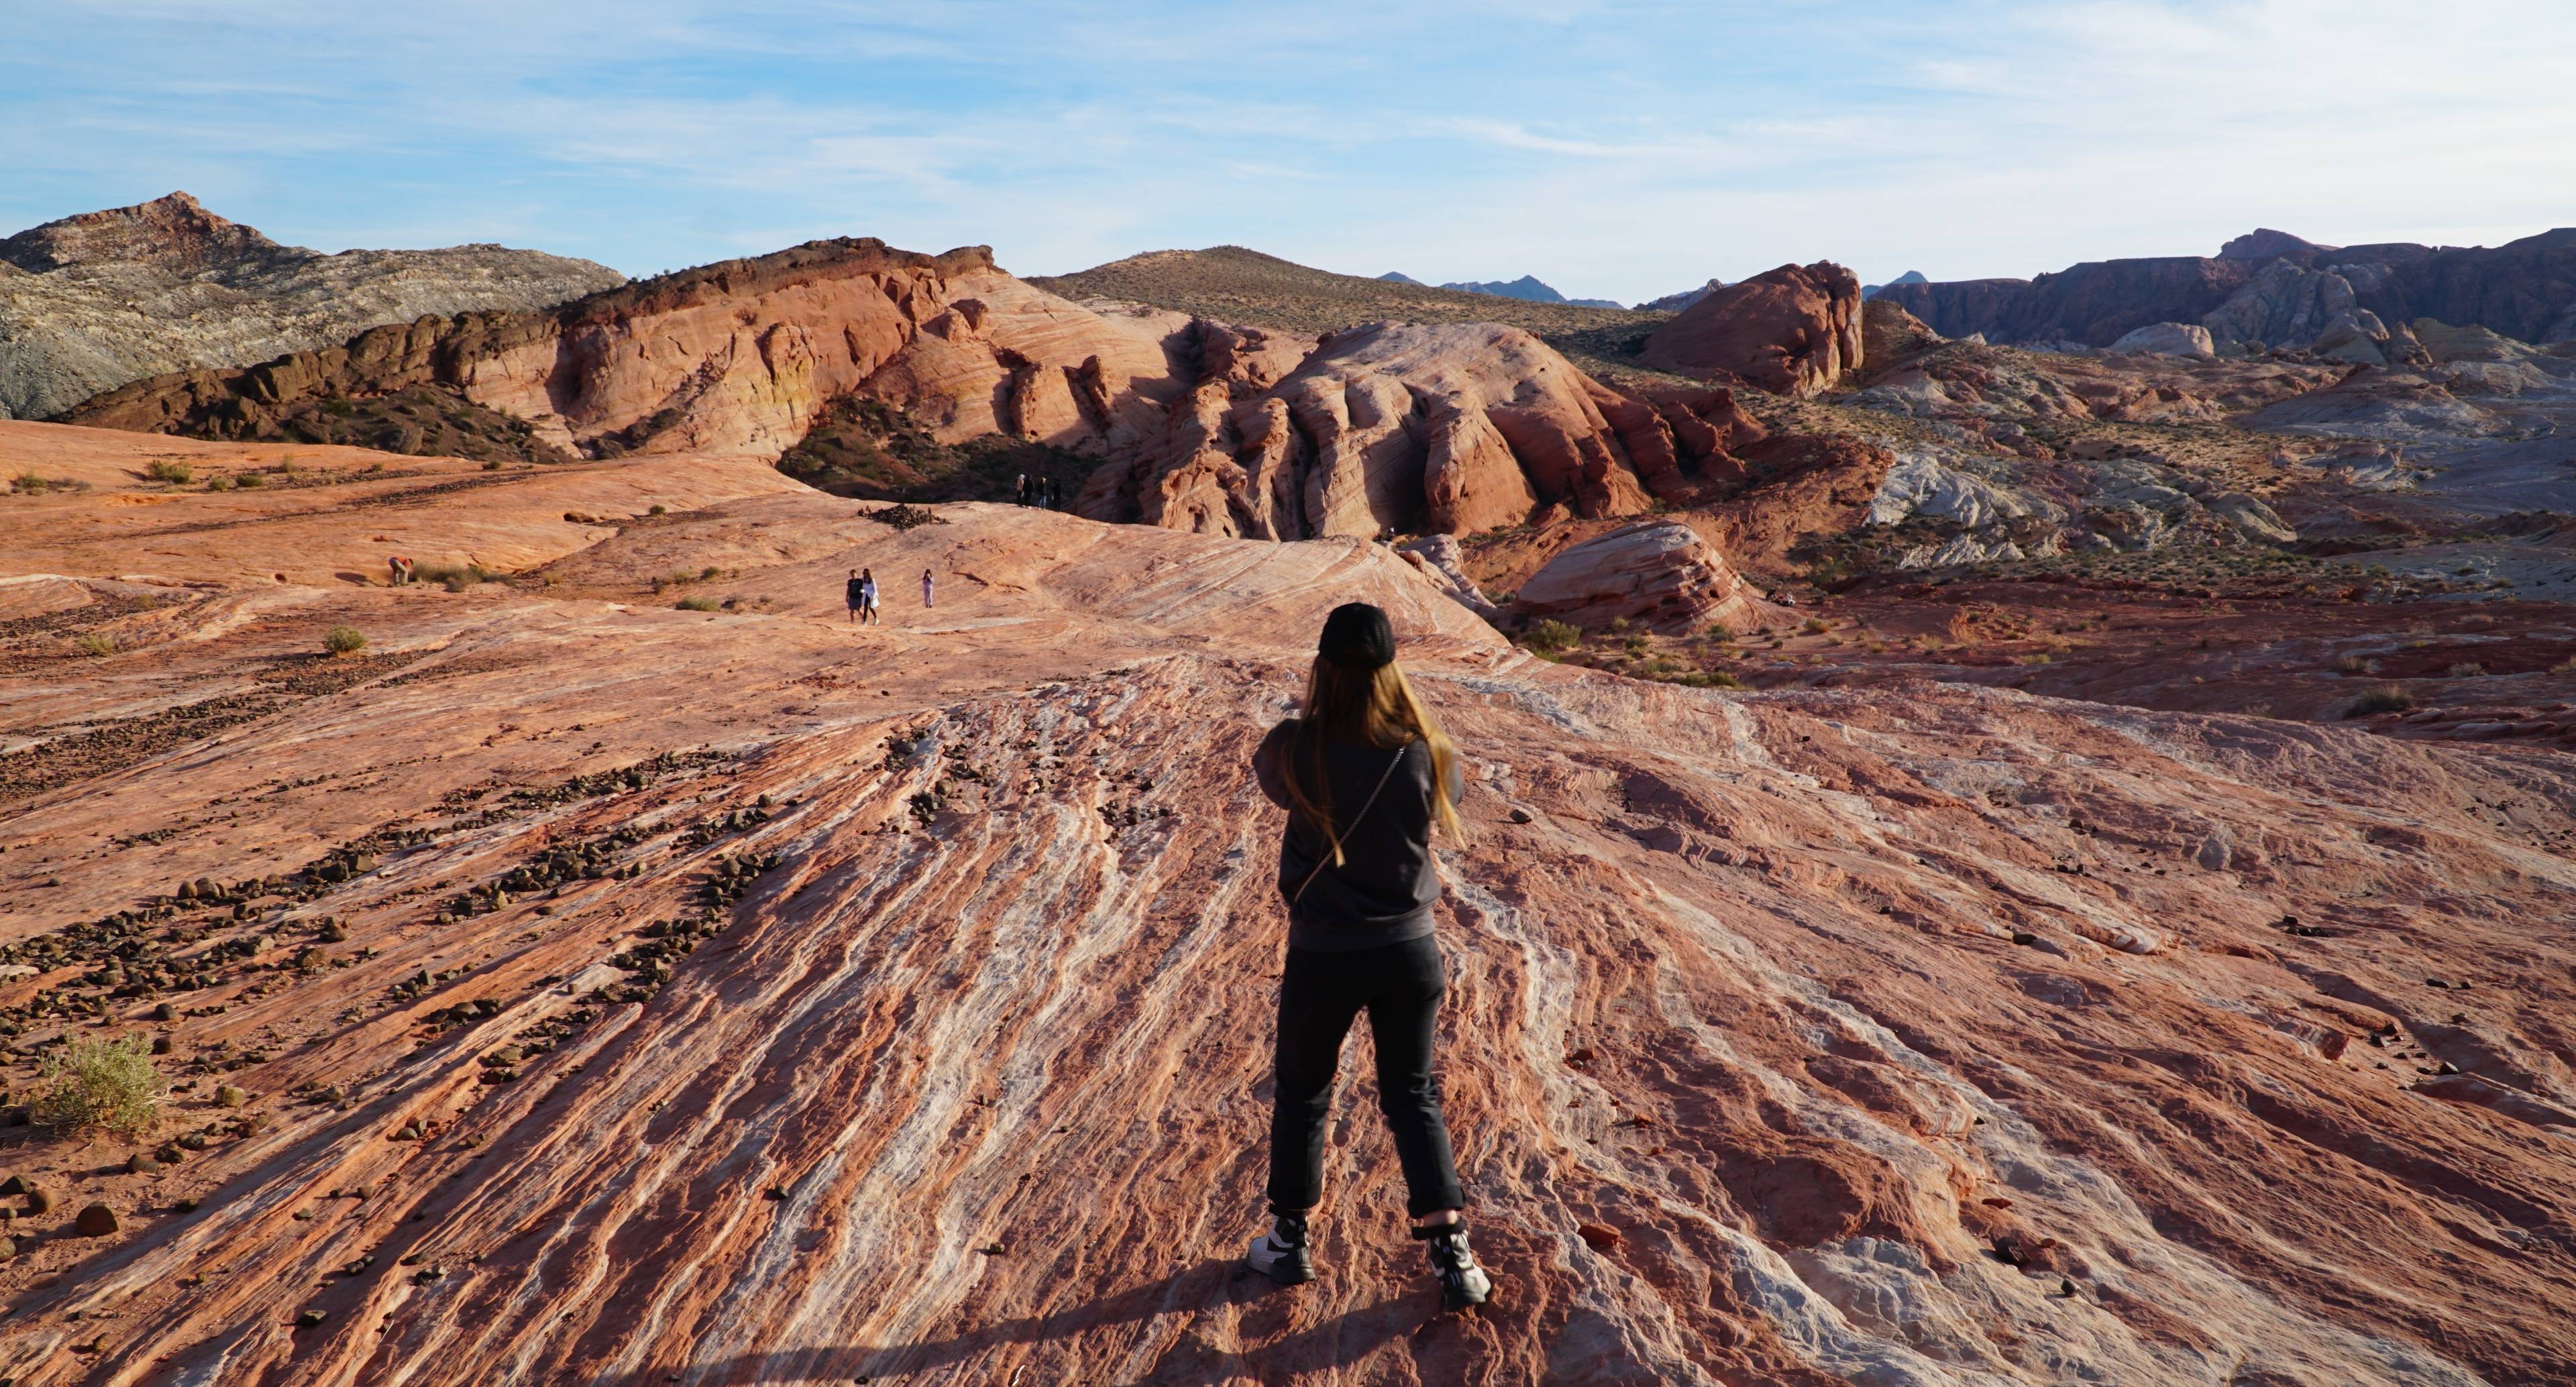 Hike Desert Landscapes and Hit the Bright Lights of Las Vegas